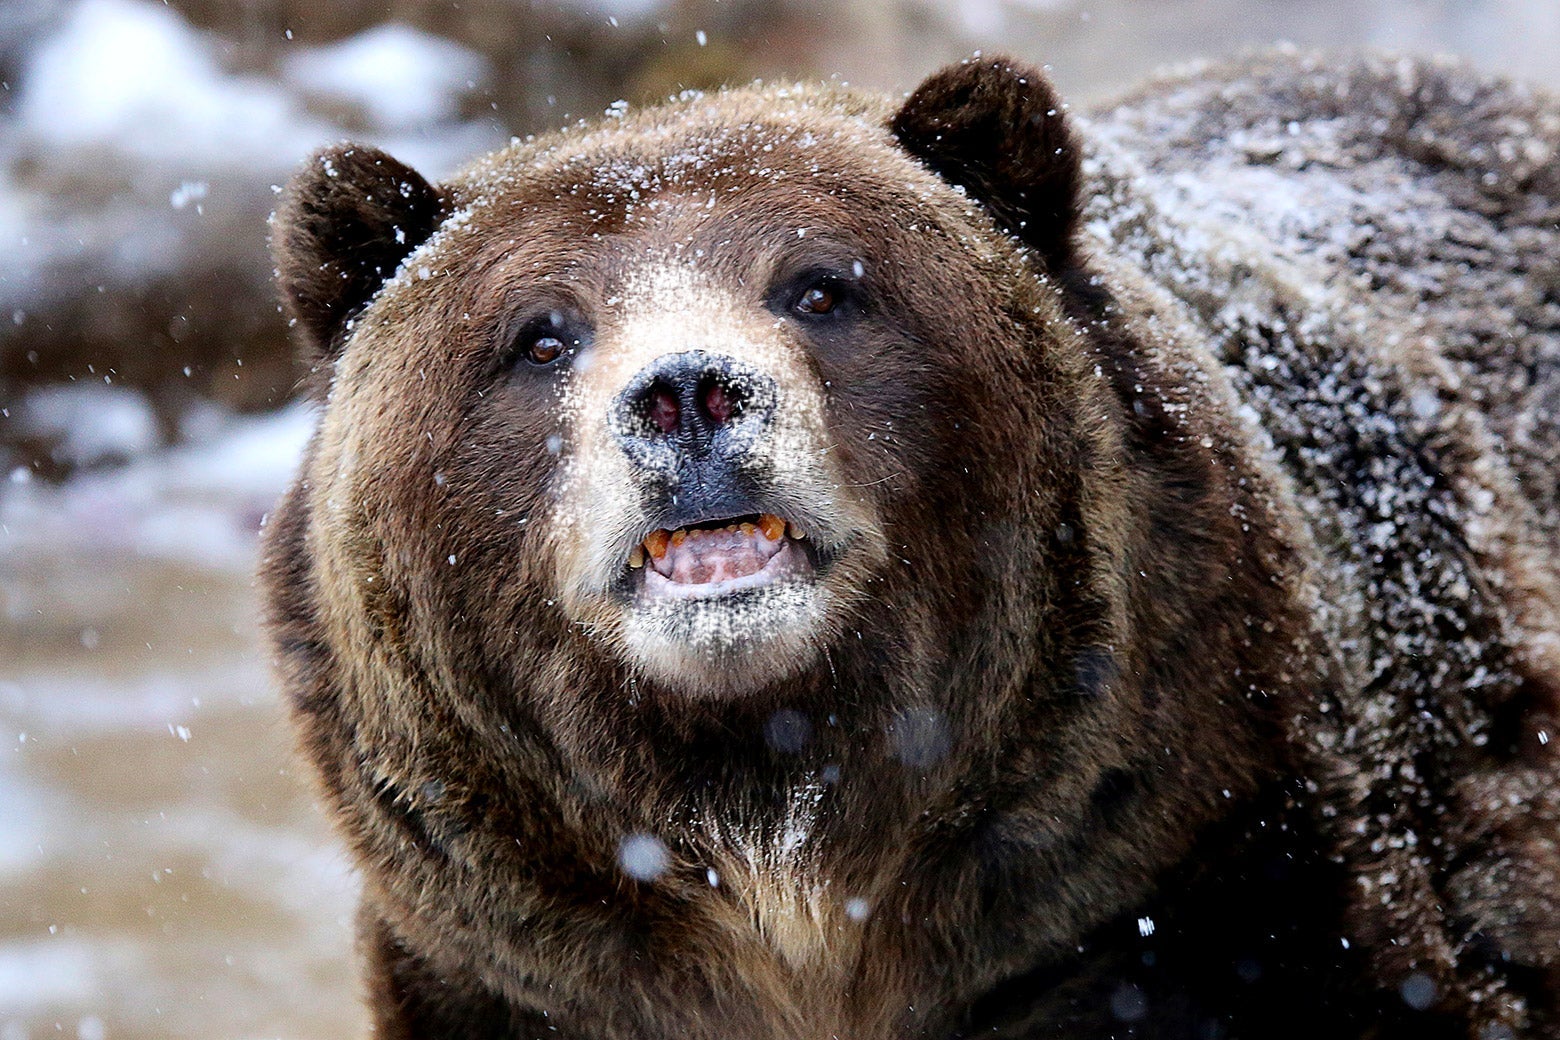 A grizzly bear baring its teeth, fur covered with snow